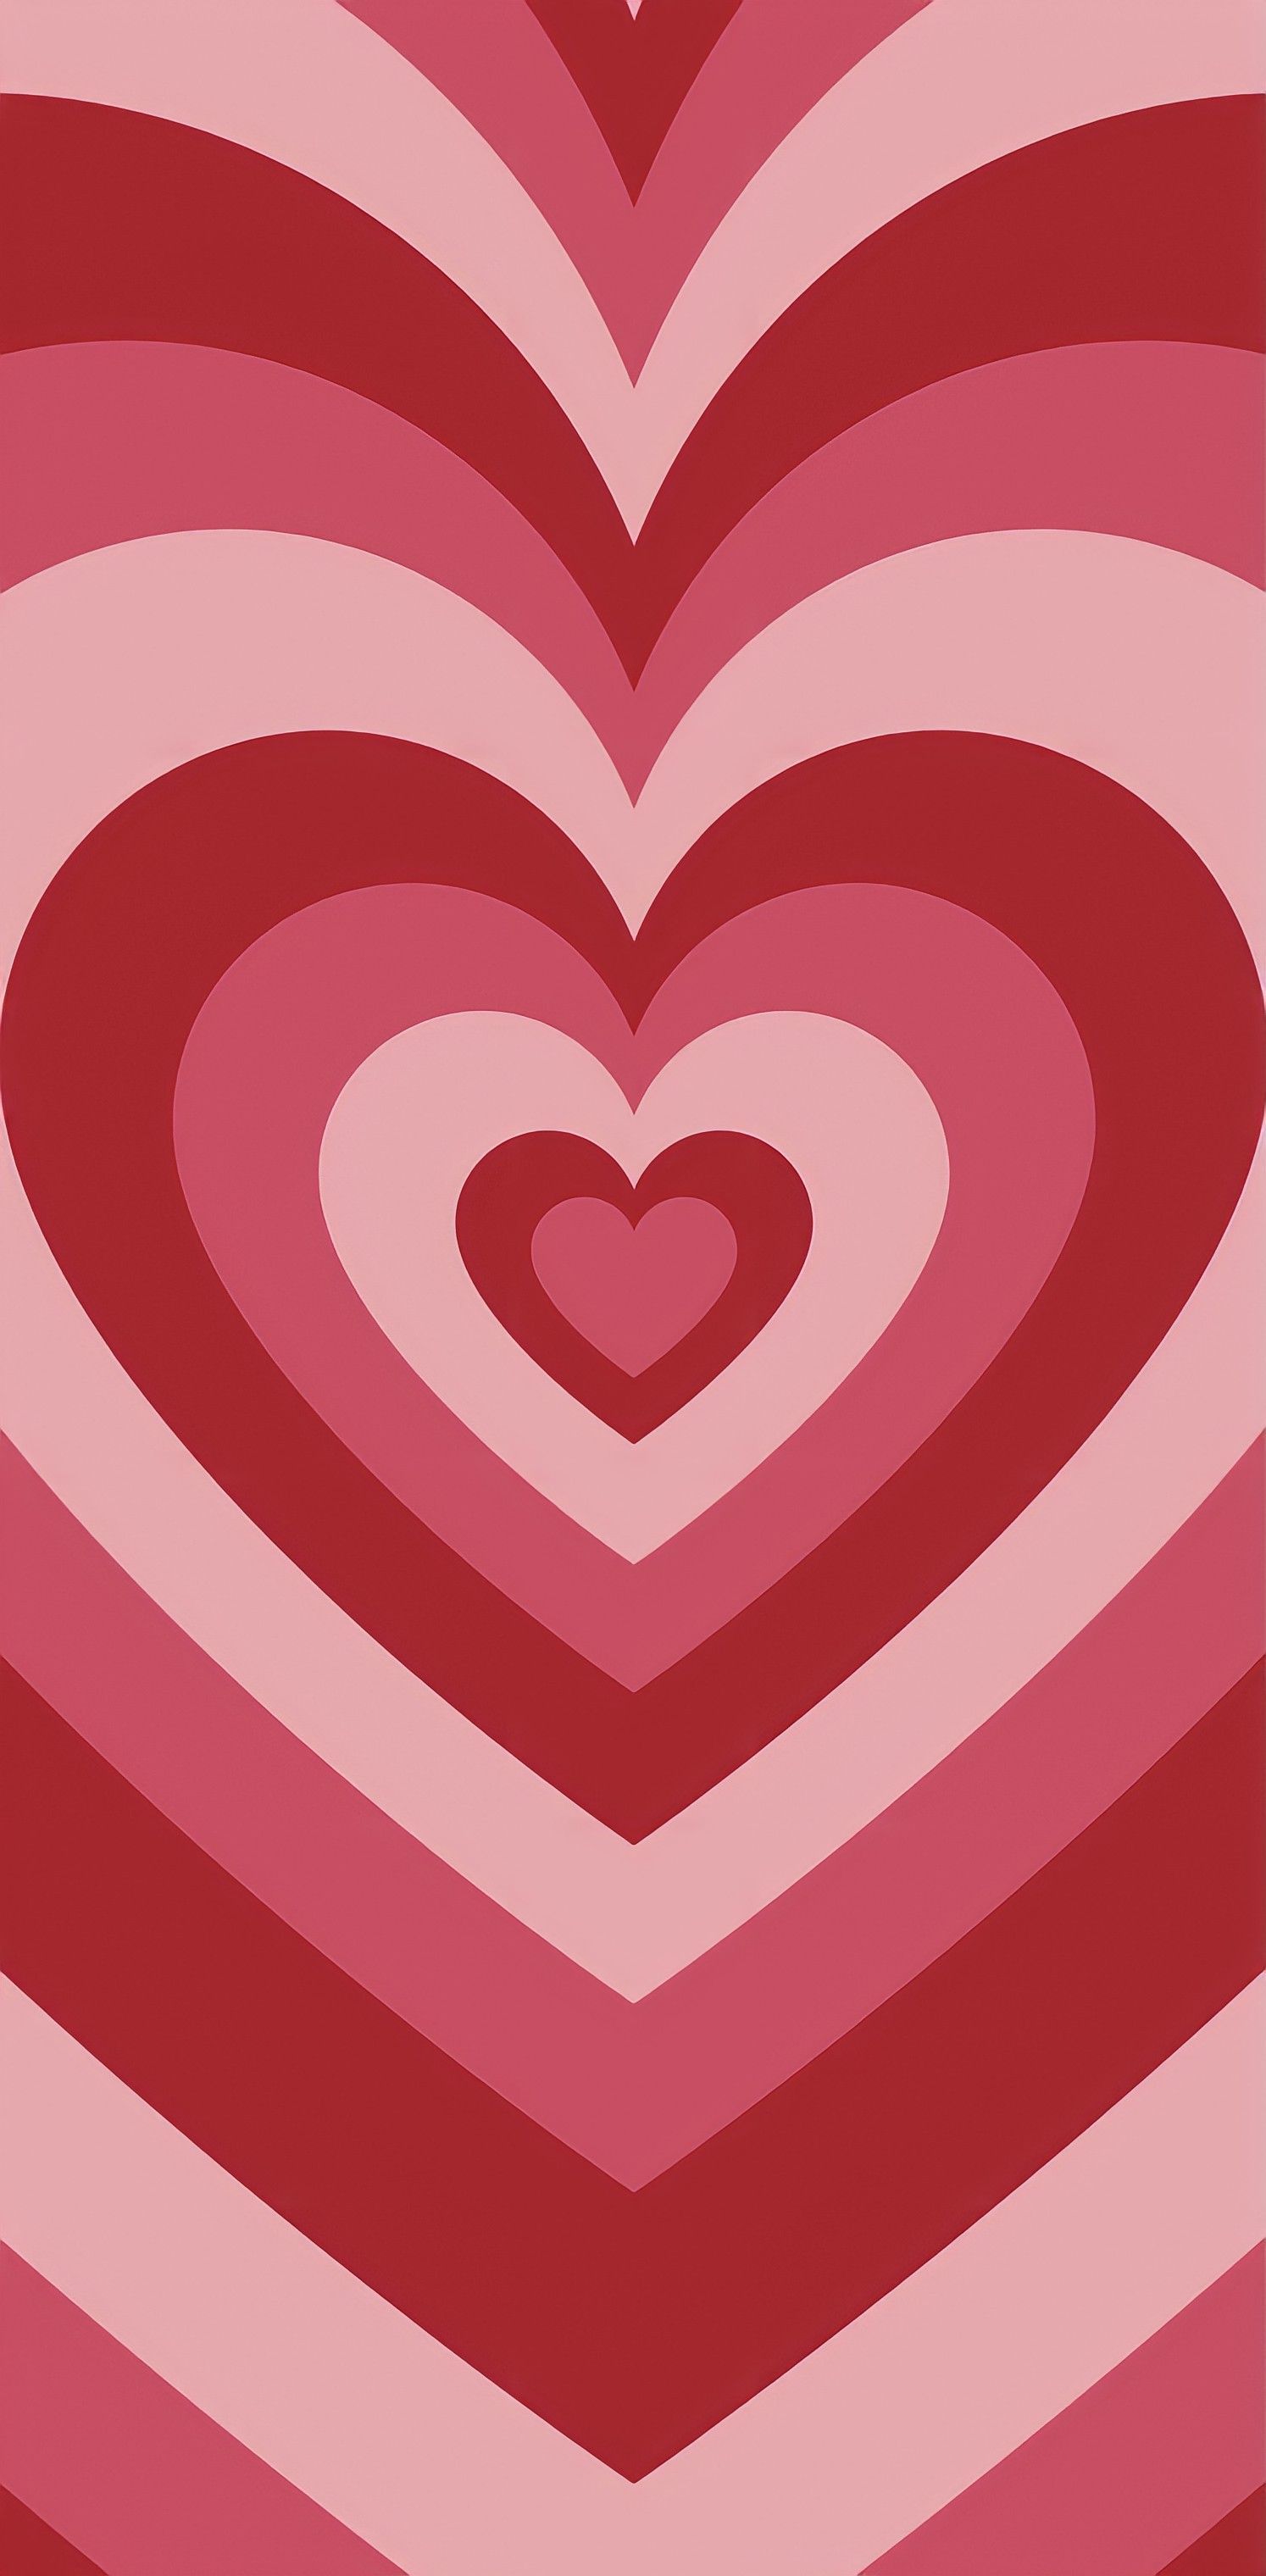 A red and white striped heart pattern - Pink heart, heart